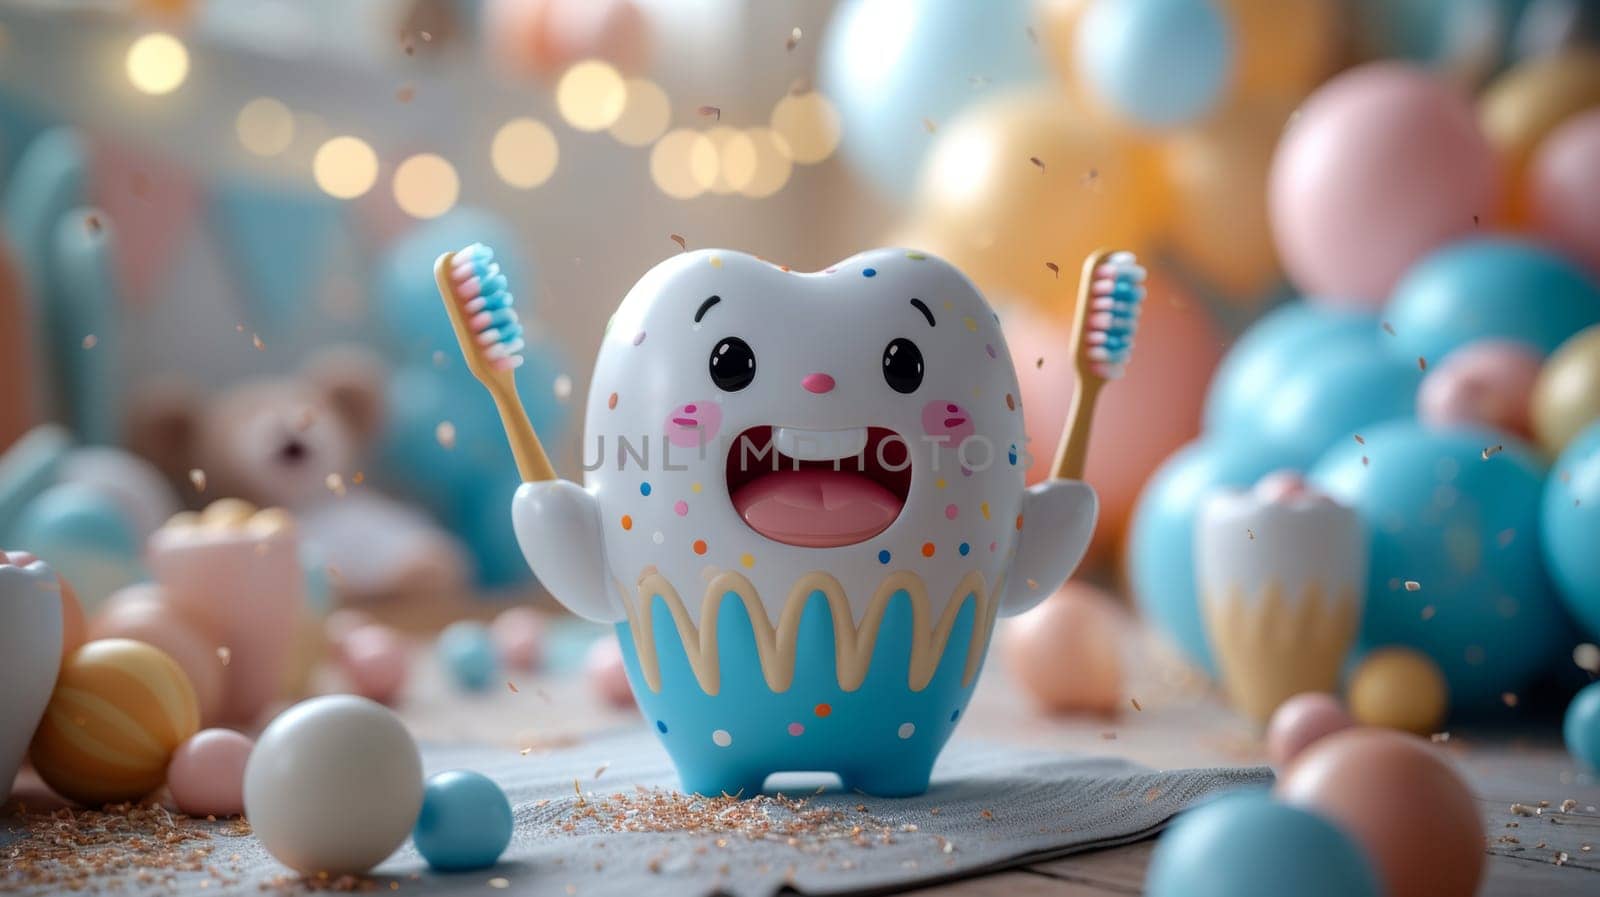 A happy smiling tooth on a festive background with colorful balls is the concept of a clean tooth. 3d illustration.